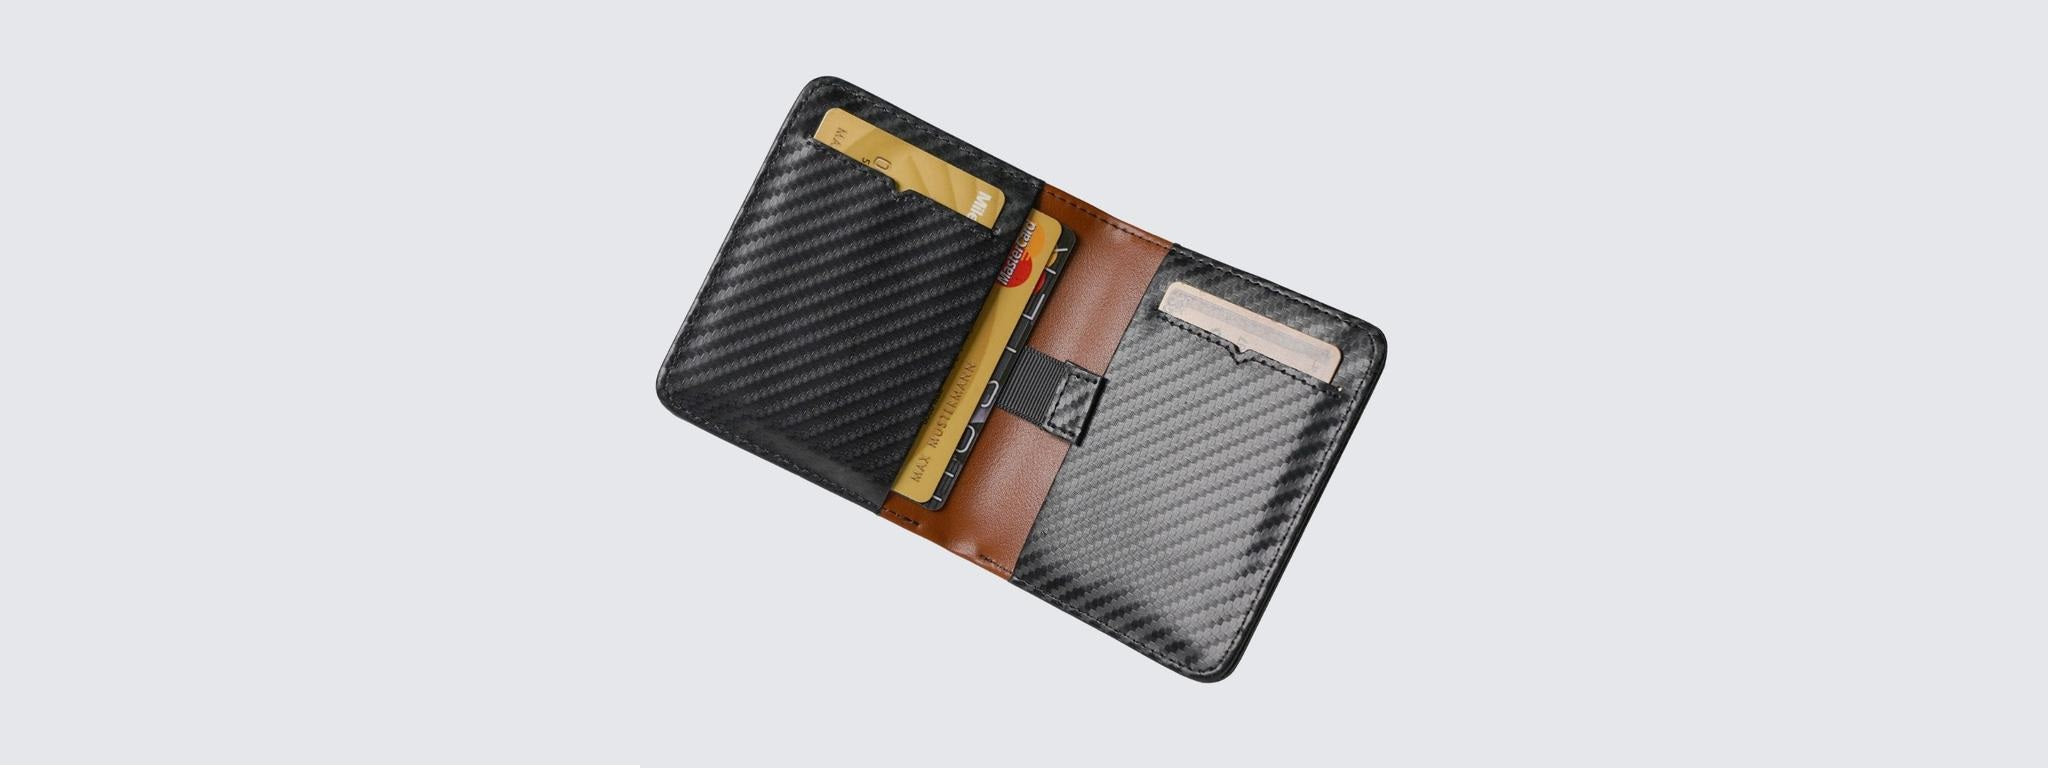 Slim Wallets - Are They Really Slim